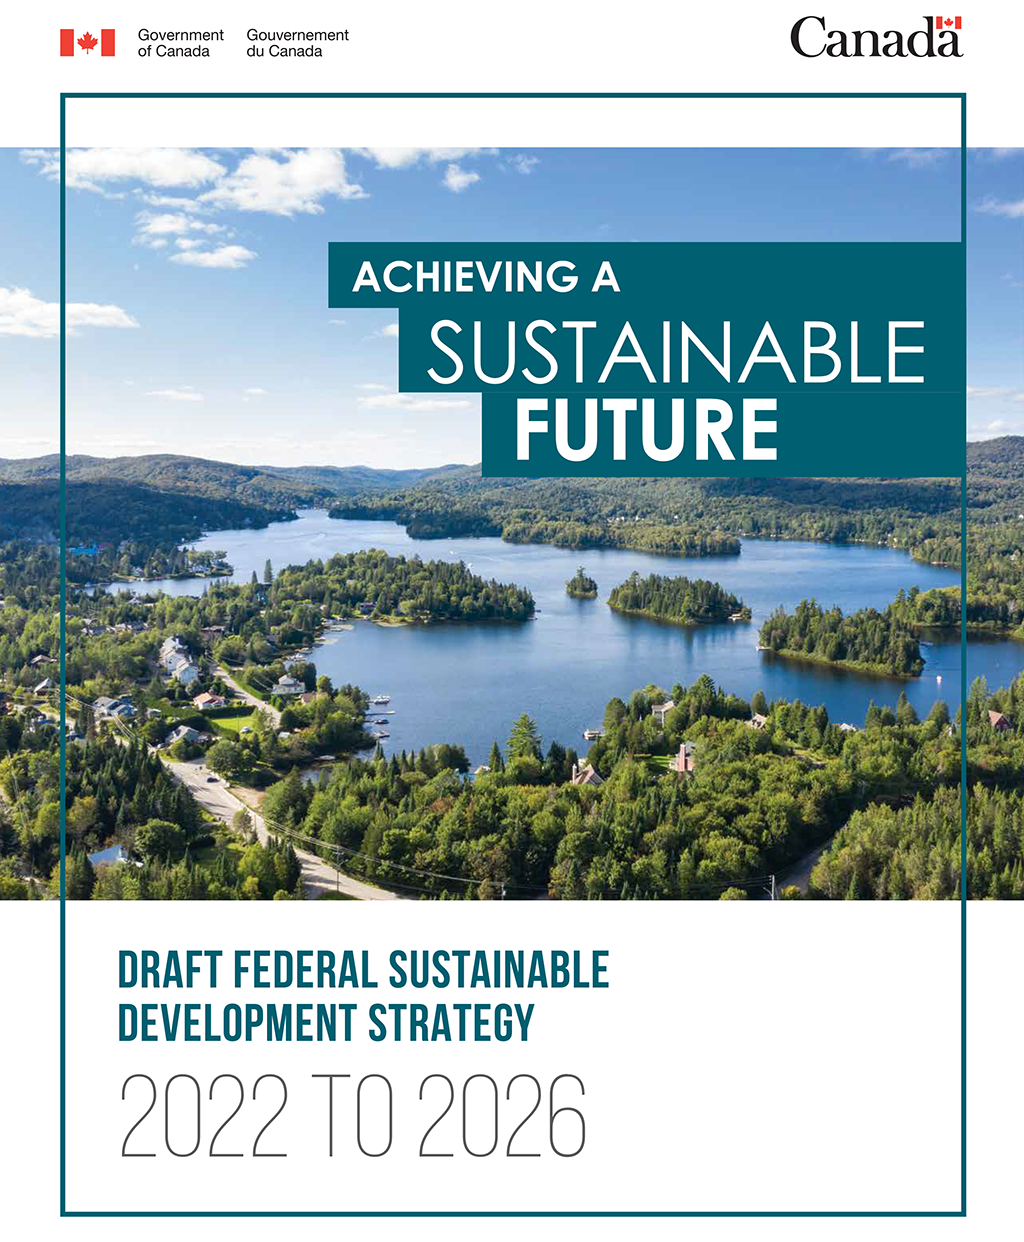 Cover page of the publication “Achieving a Sustainable Future—Draft Federal Sustainable Development Strategy 2022 to 2026”